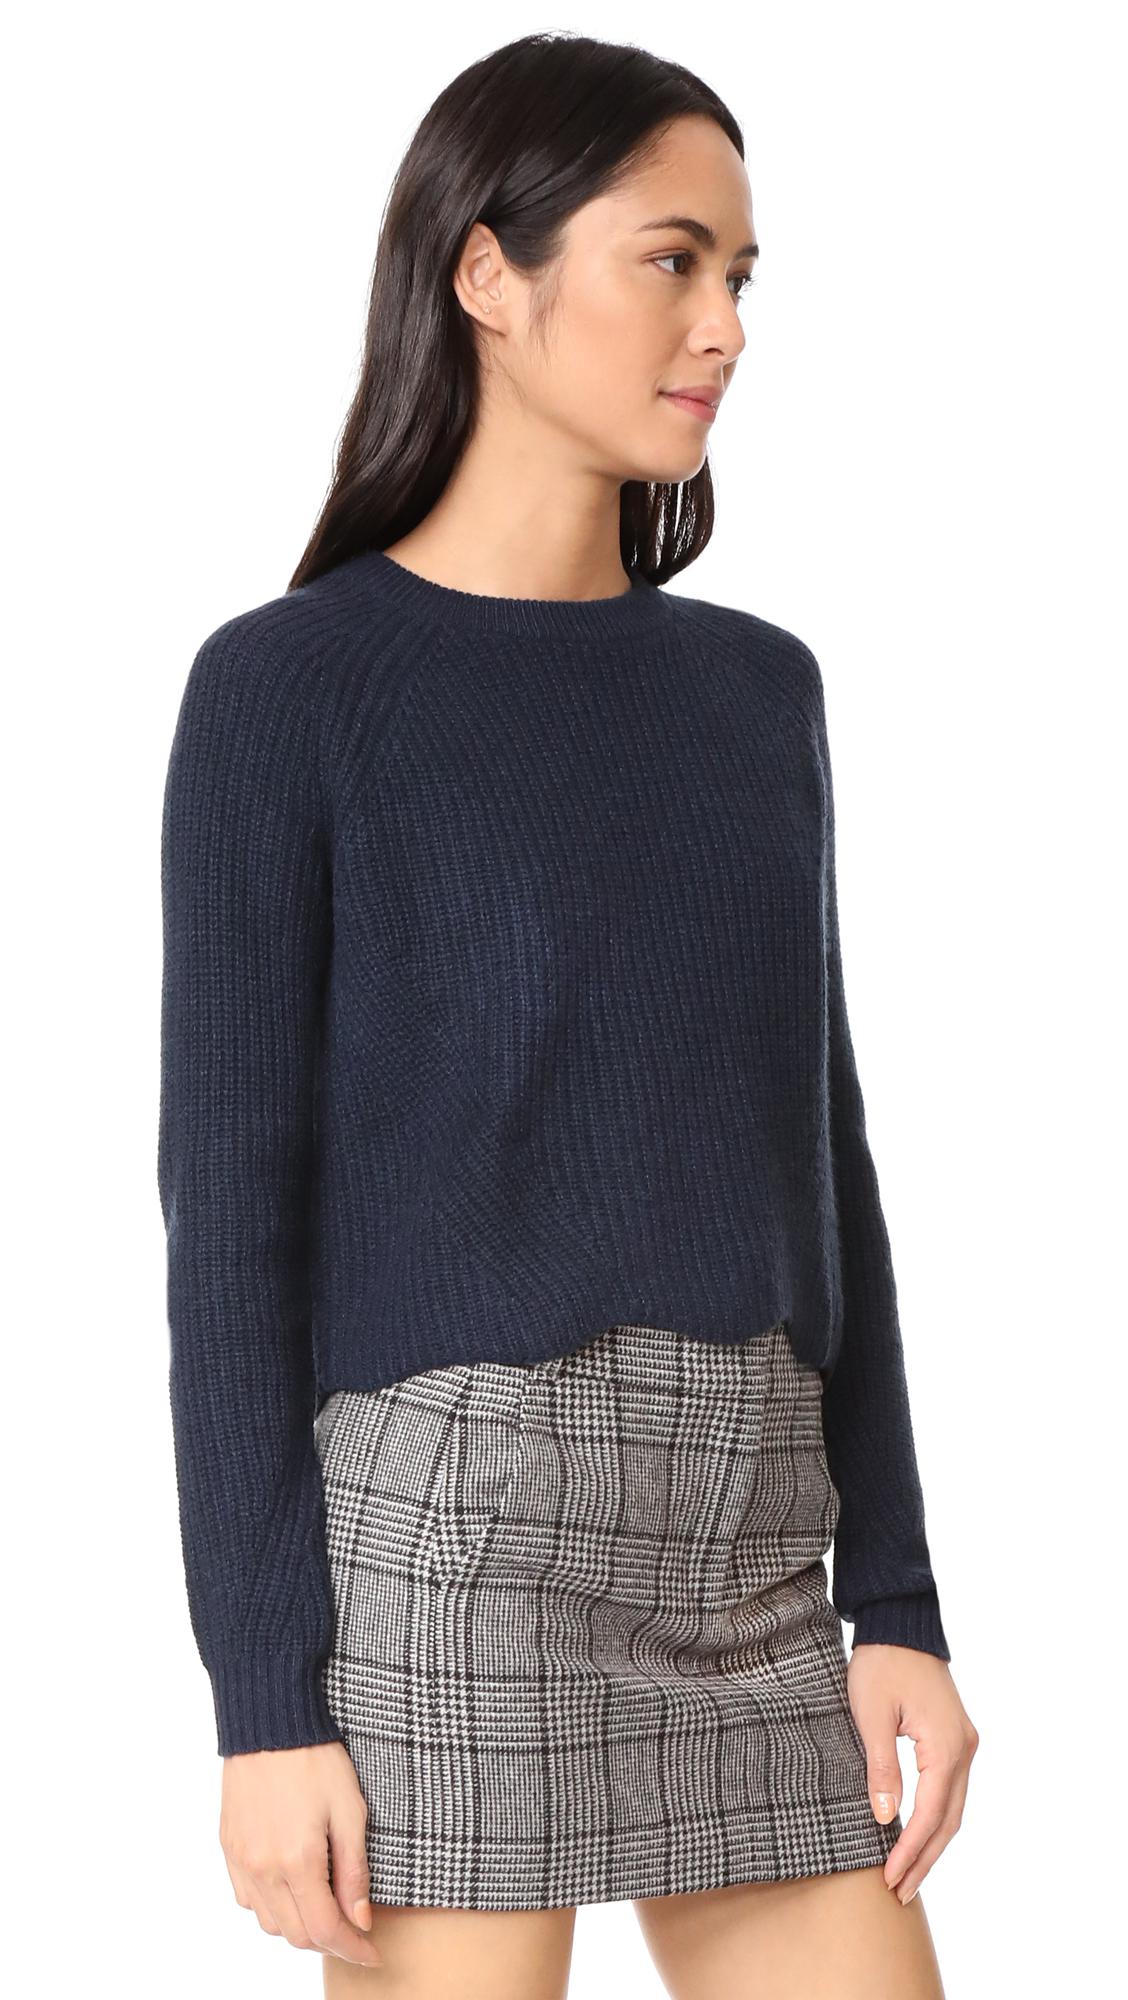 Autumn Cashmere Scalloped Cashmere Shaker Sweater in Navy (Blue) - Lyst